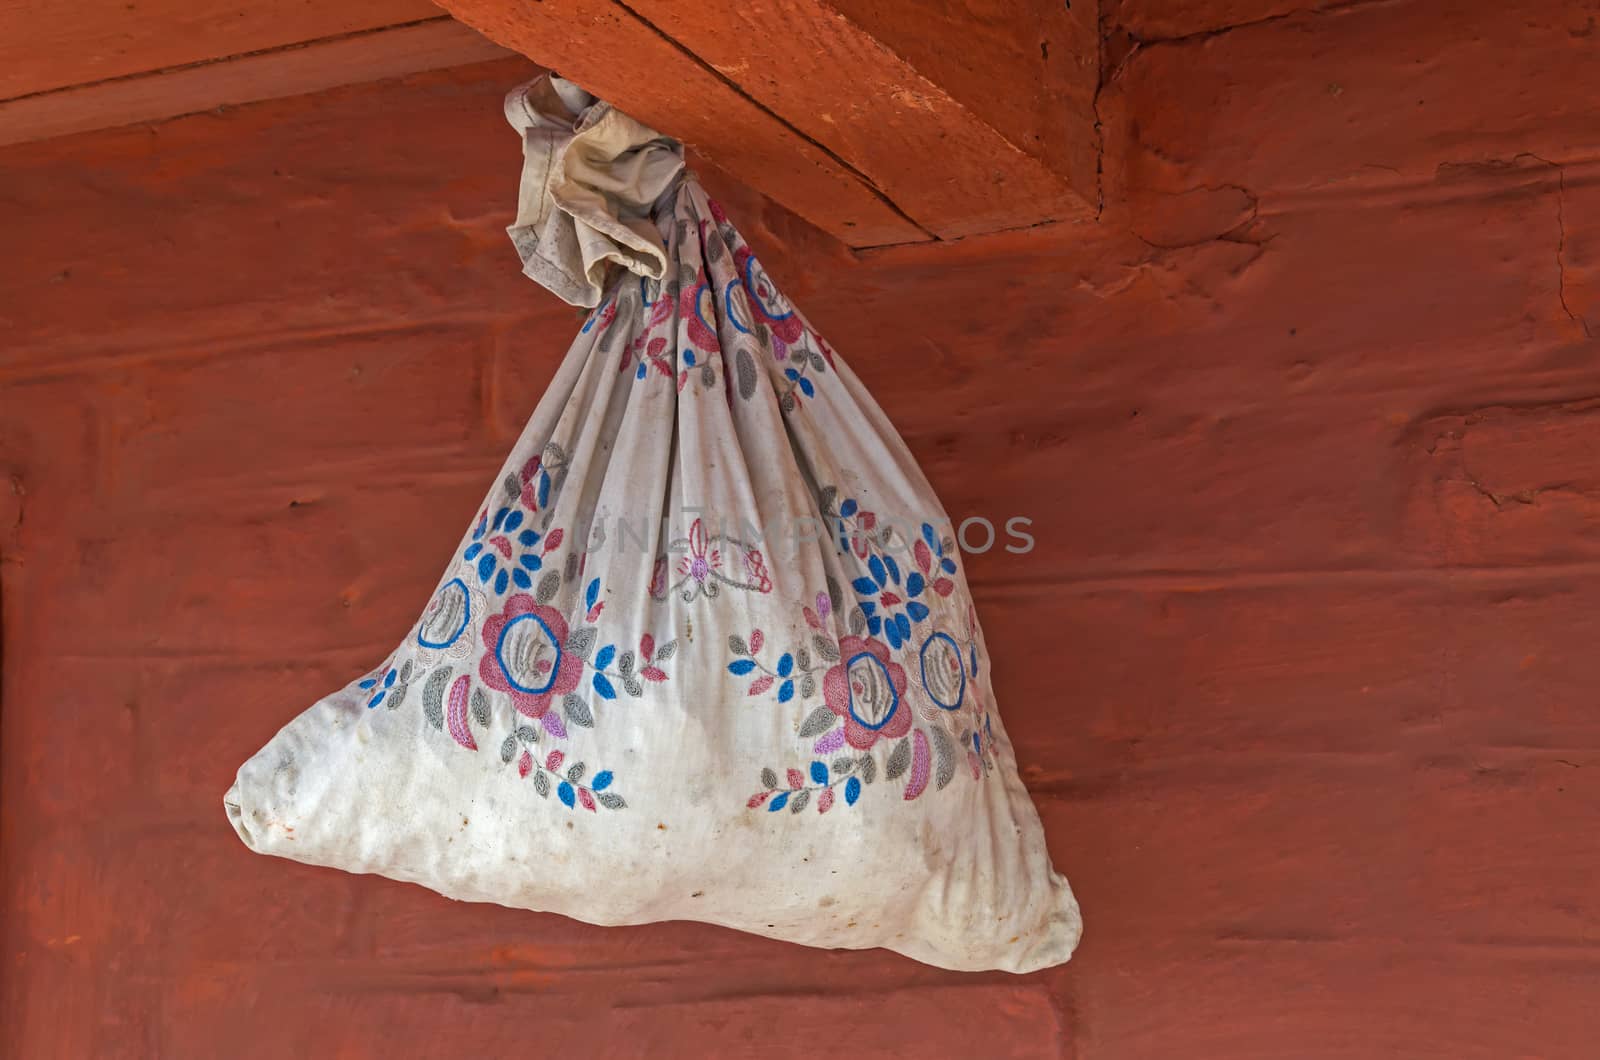 A feedbag with seeds hanging under the roof of a village house.